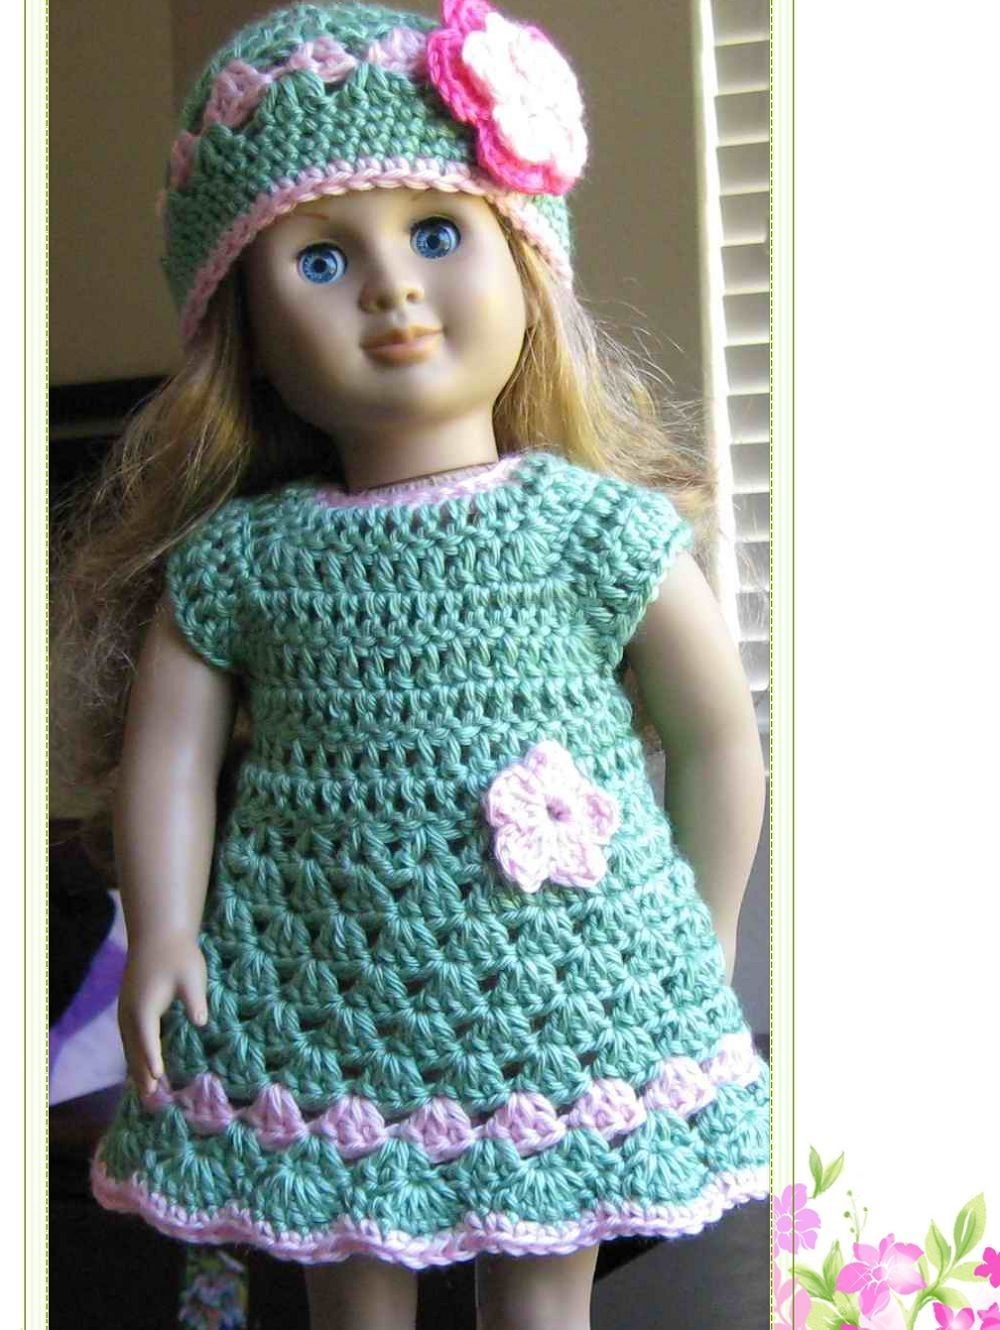 Crochet Doll Clothes Patterns Barbie Doll Clothes Patterns Free Crochet Patterns Barbie Doll